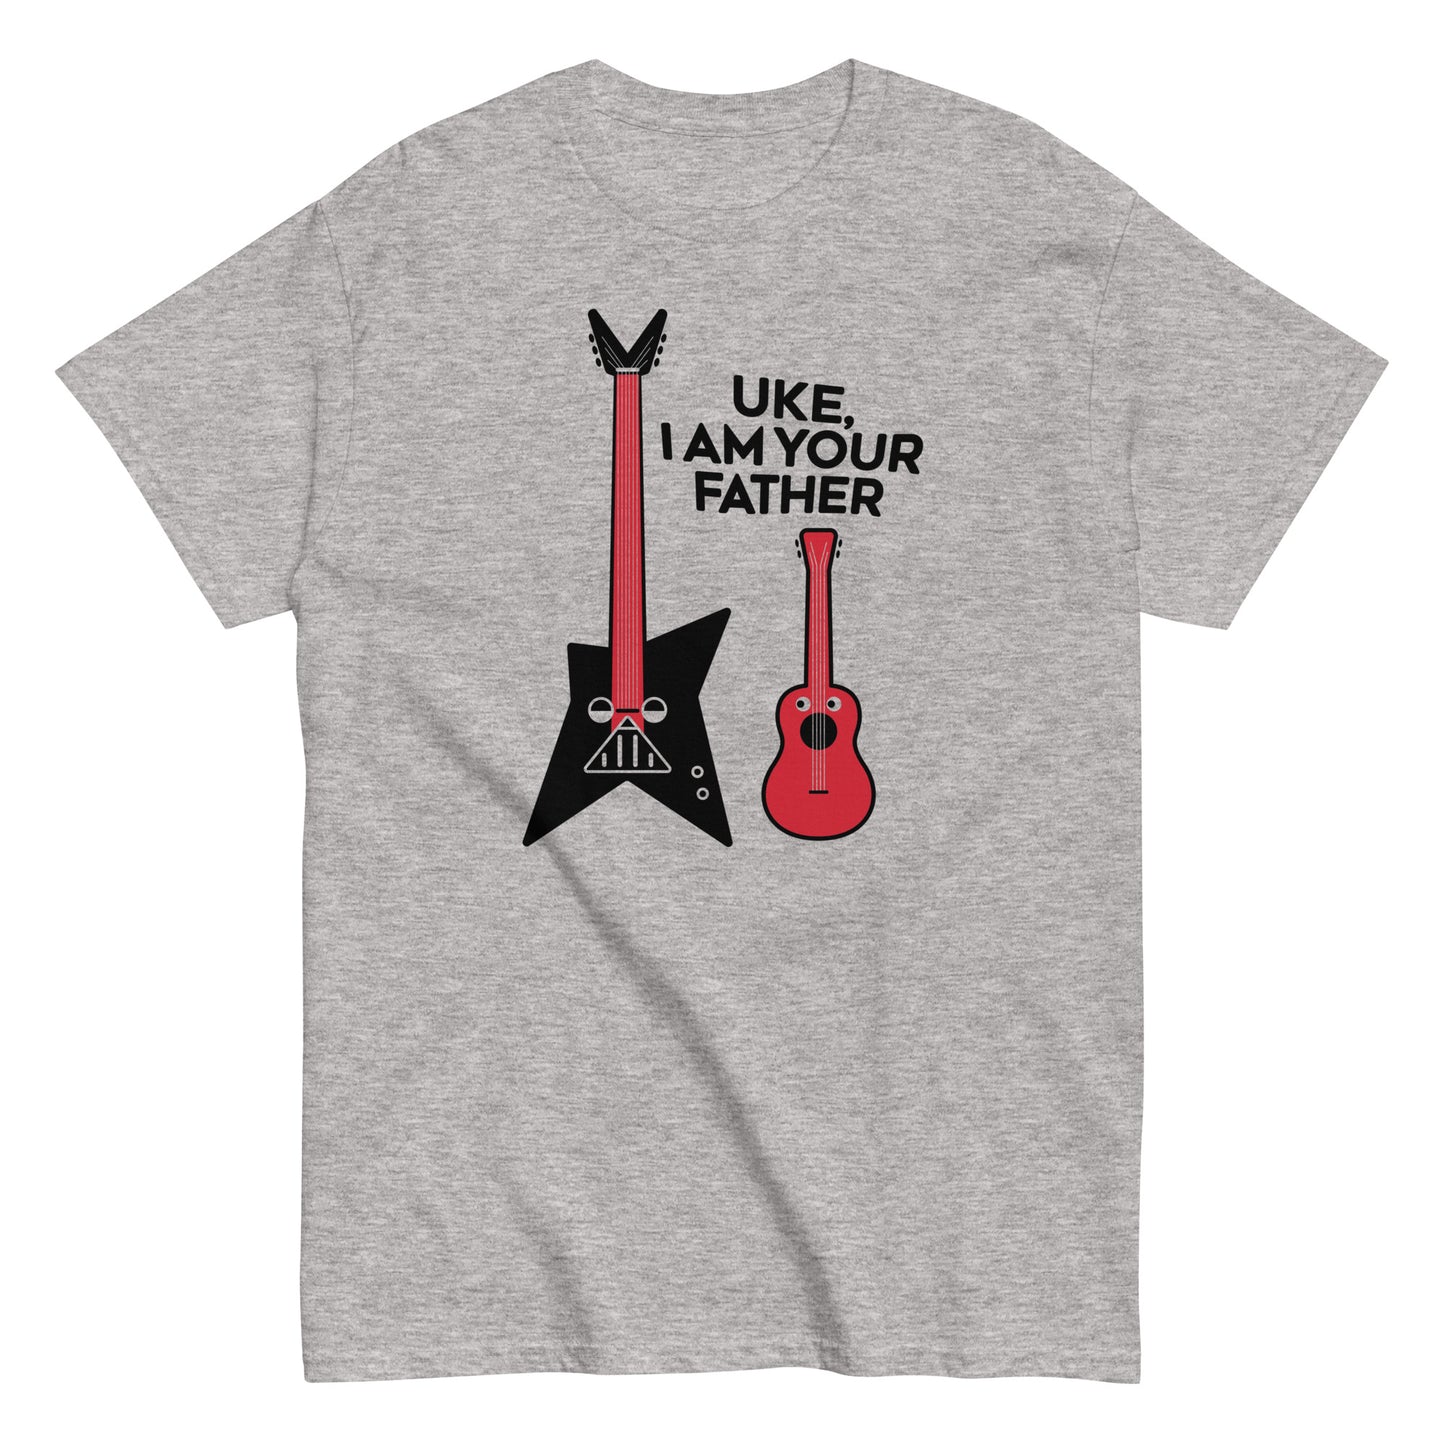 Uke, I Am Your Father Men's Classic Tee